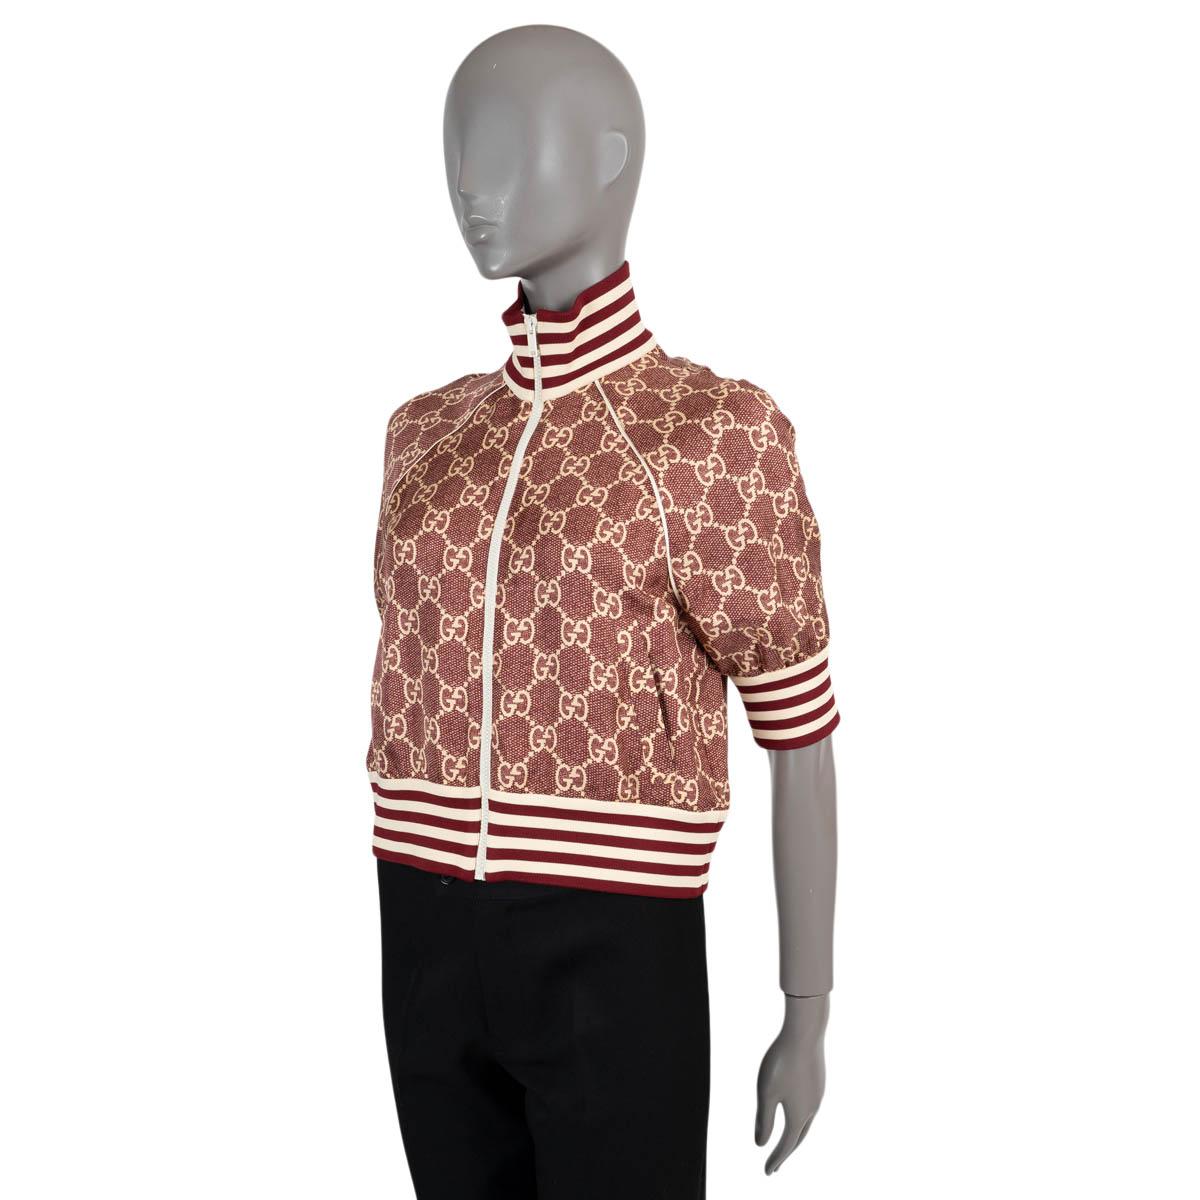 100% authentic Gucci short sleeve cropped bomber in burgundy and beige monogram silk (100%). Features a high neck, raglan sleeves (measurement taken from the neck), two slant pockets and striped elastic trims. Has been worn and is in excellent